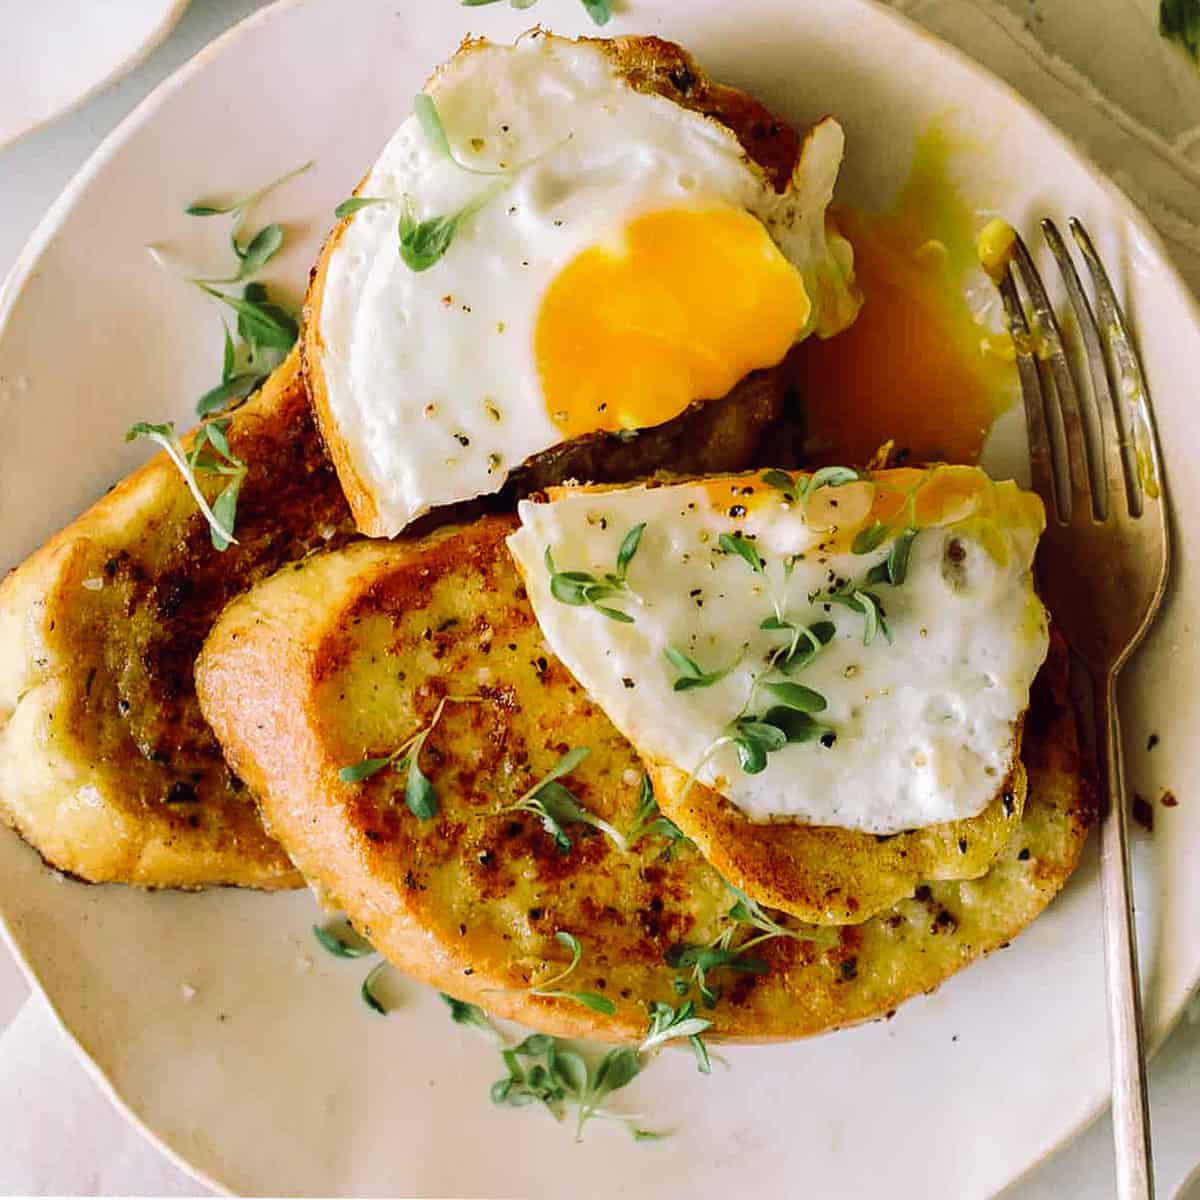 Savory French Toast Recipe - Step By Step Guide